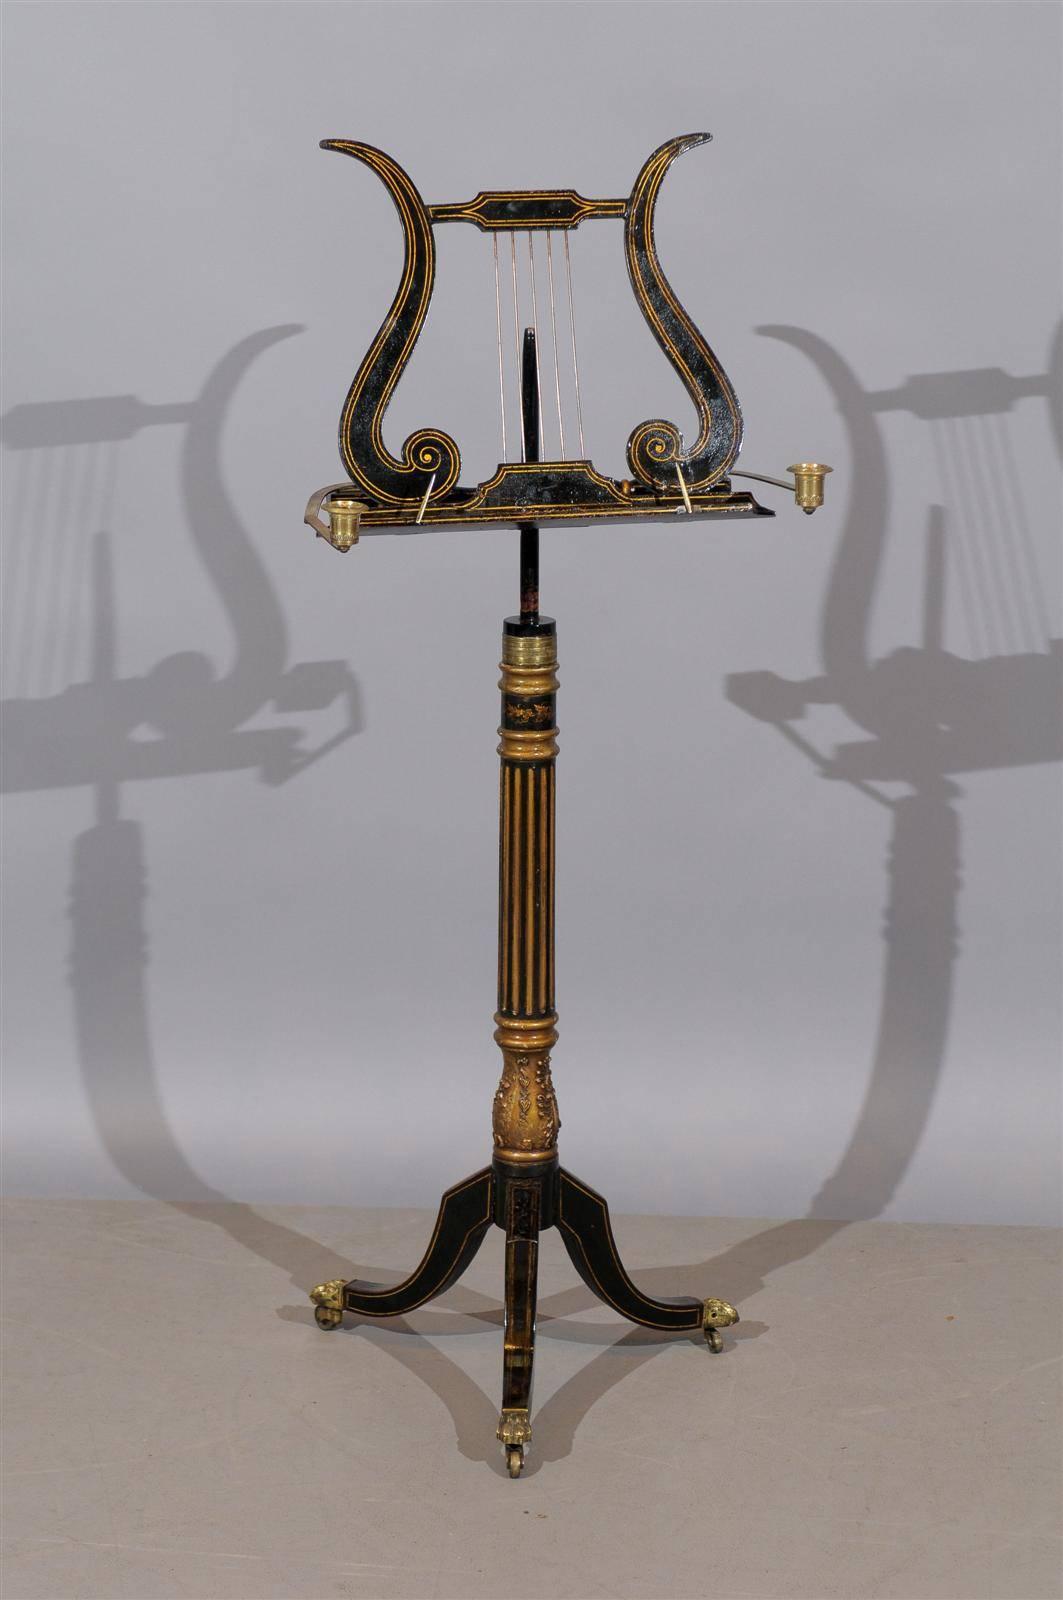 A 19th century English Regency ebonized and giltwood music stand with lyre shape and adjustable candle holders.